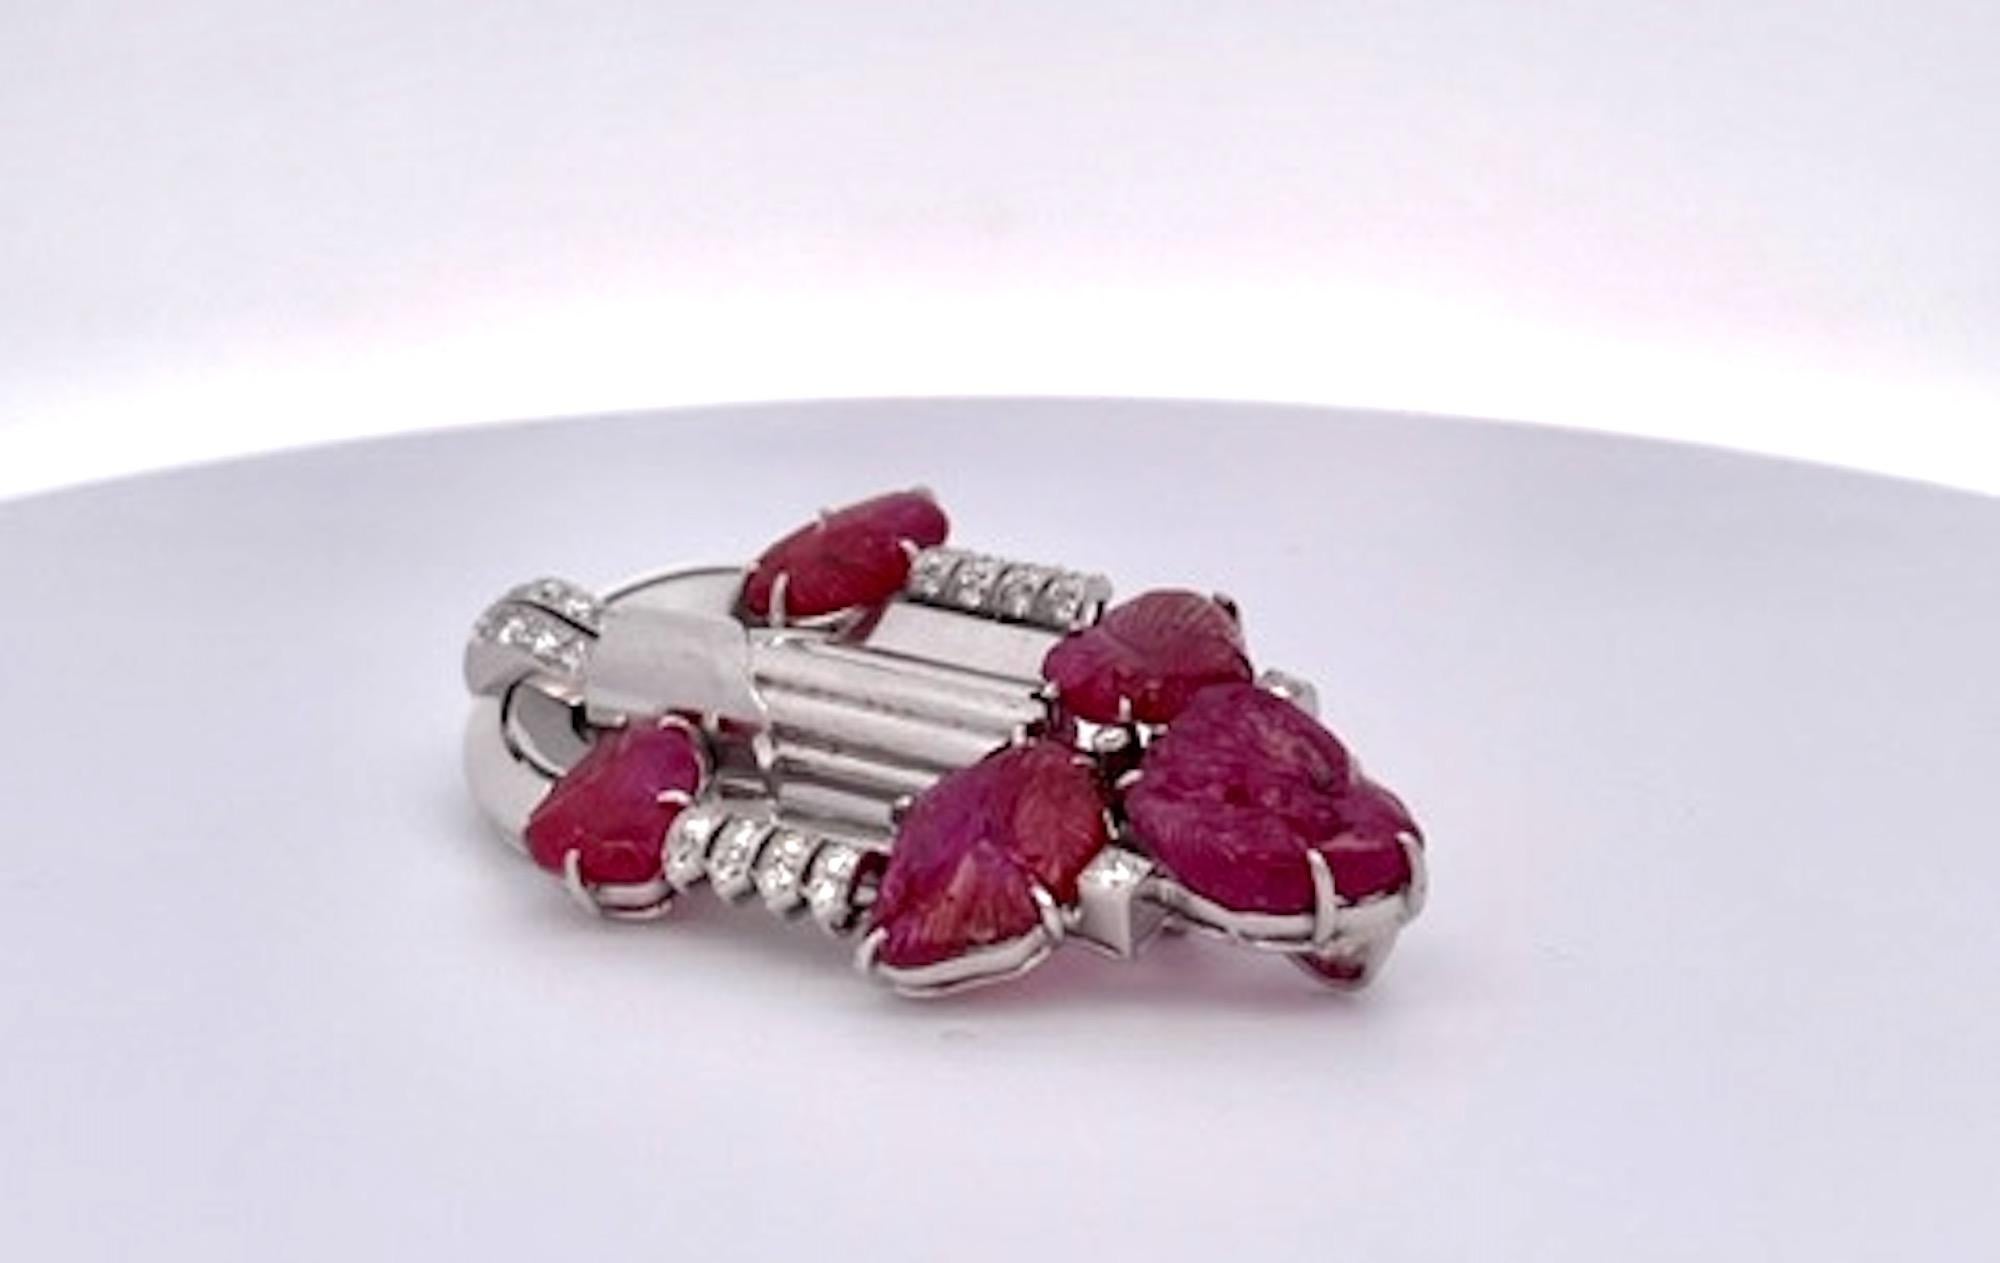 This gorgeous Art Deco brooch is circa 1930 and is set with approximately 20 carats of carved rubies in gold and Platinum. The approximately 1.25 carats of diamonds (G-H color, VS-SI clarity) are set in platinum. This brooch is large at over 2